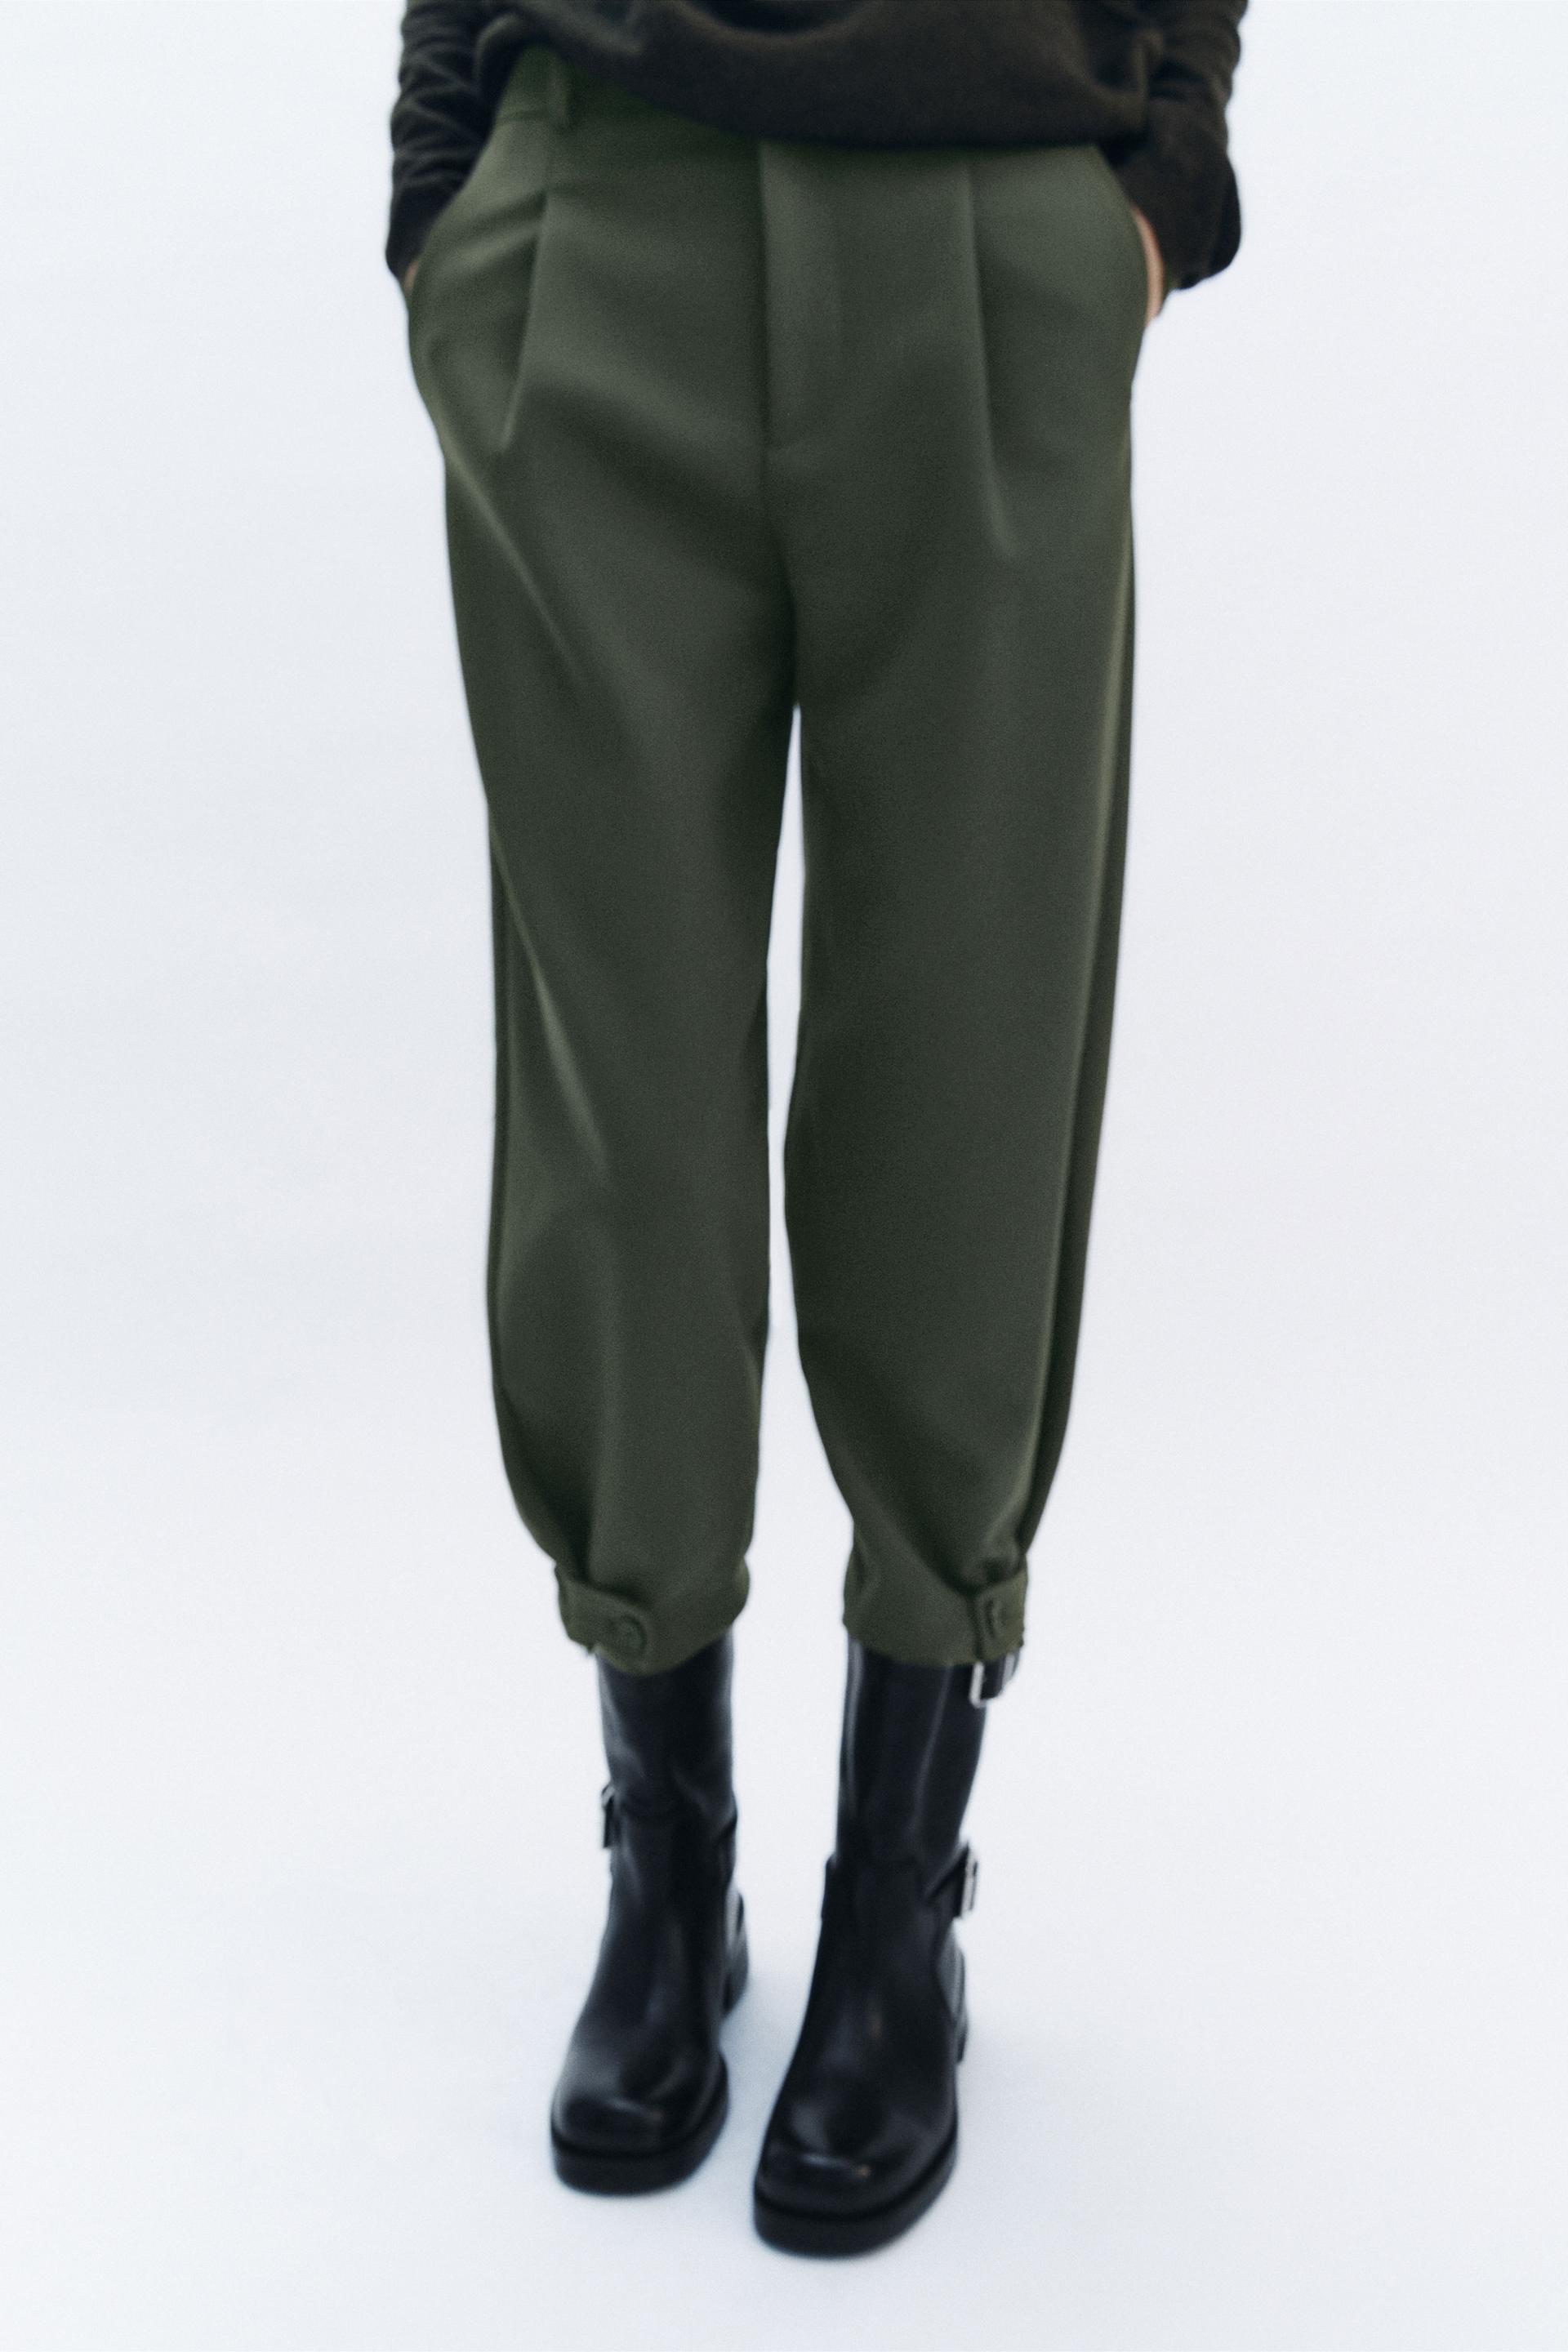 very high waisted green zara pants with pockets and